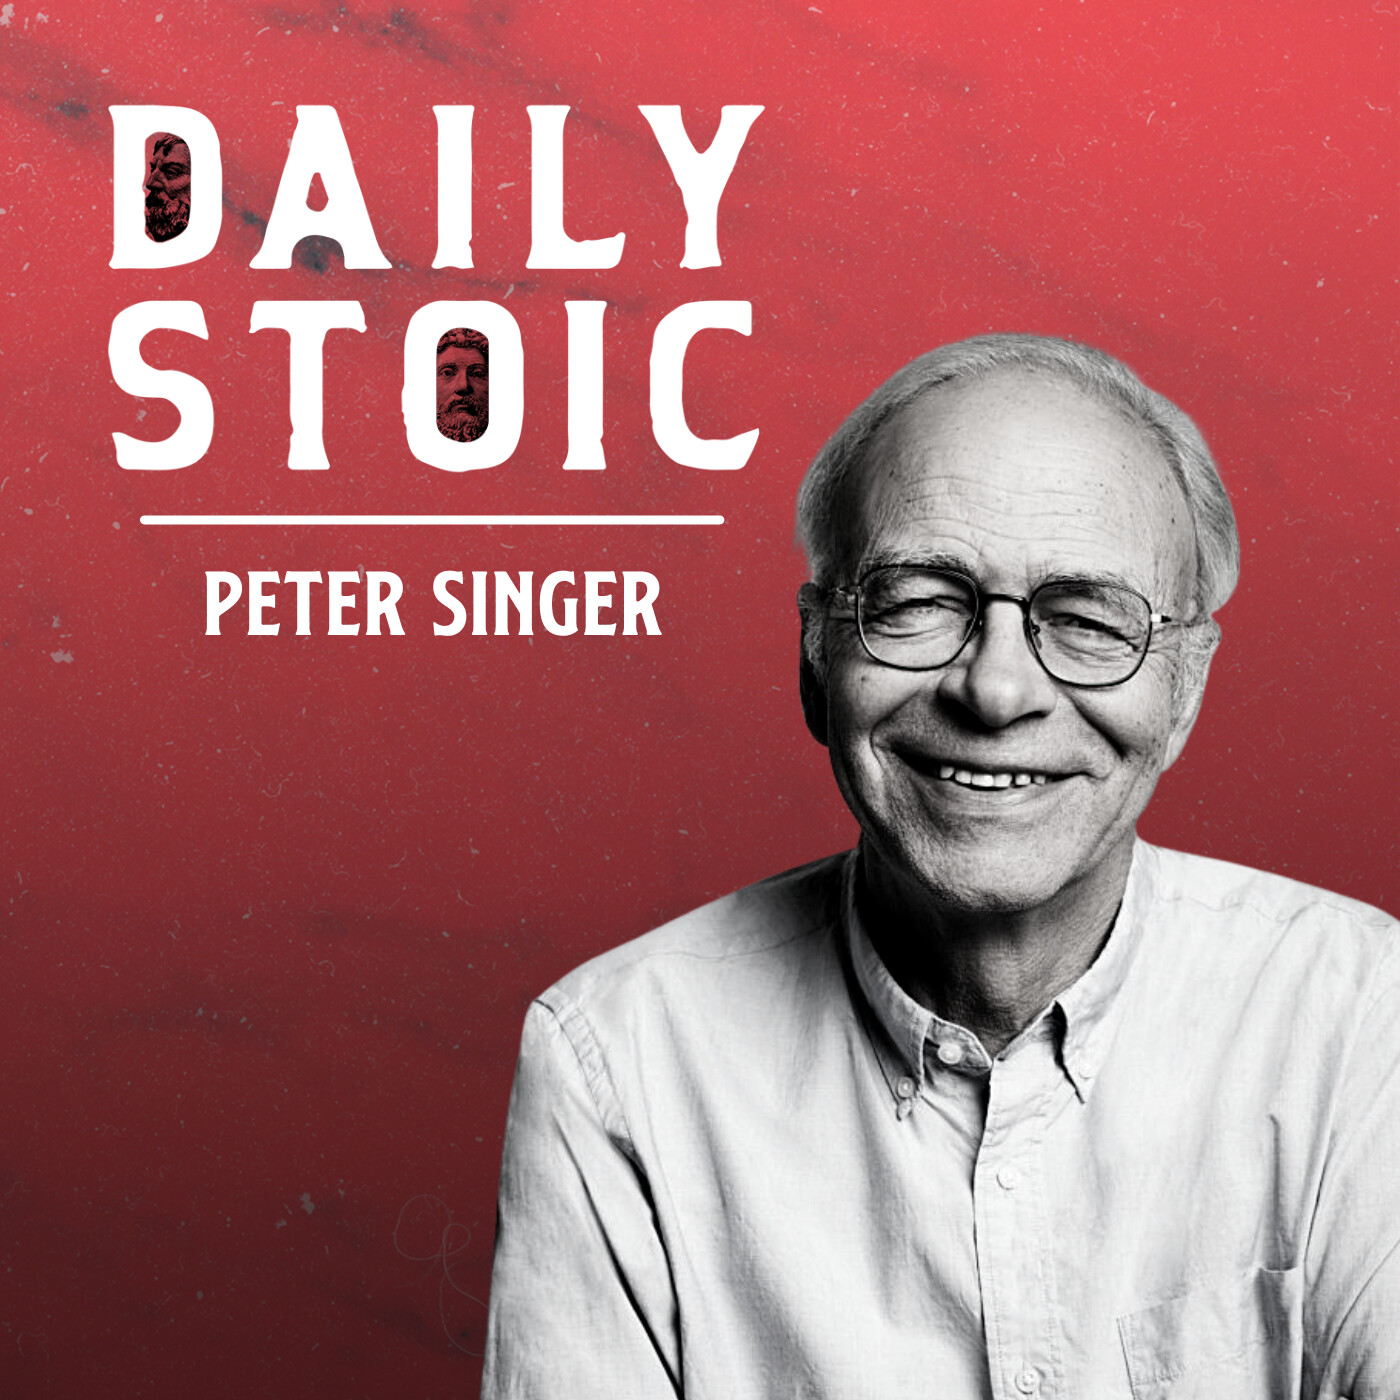 Peter Singer On Being Part Of The Solution